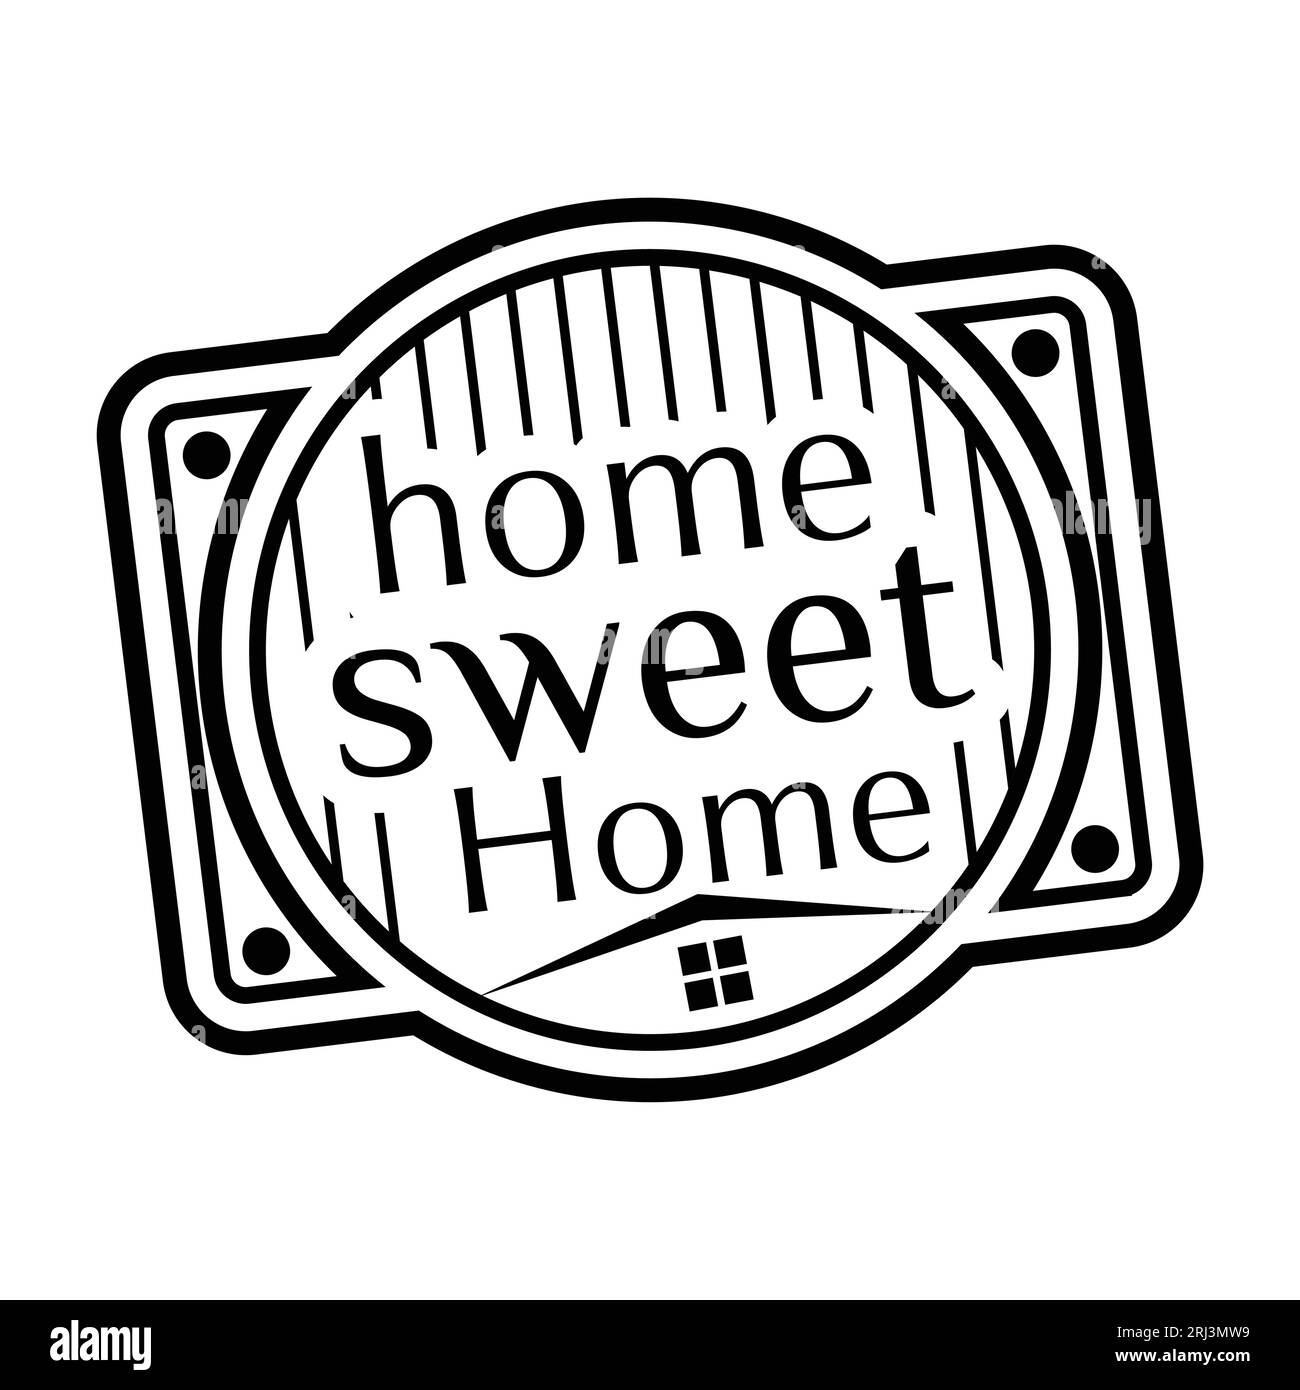 home sweet home rubber stamp. grunge design with dust scratches. effects can be easily removed for a clean, crisp look. color is easily changed. Stock Vector